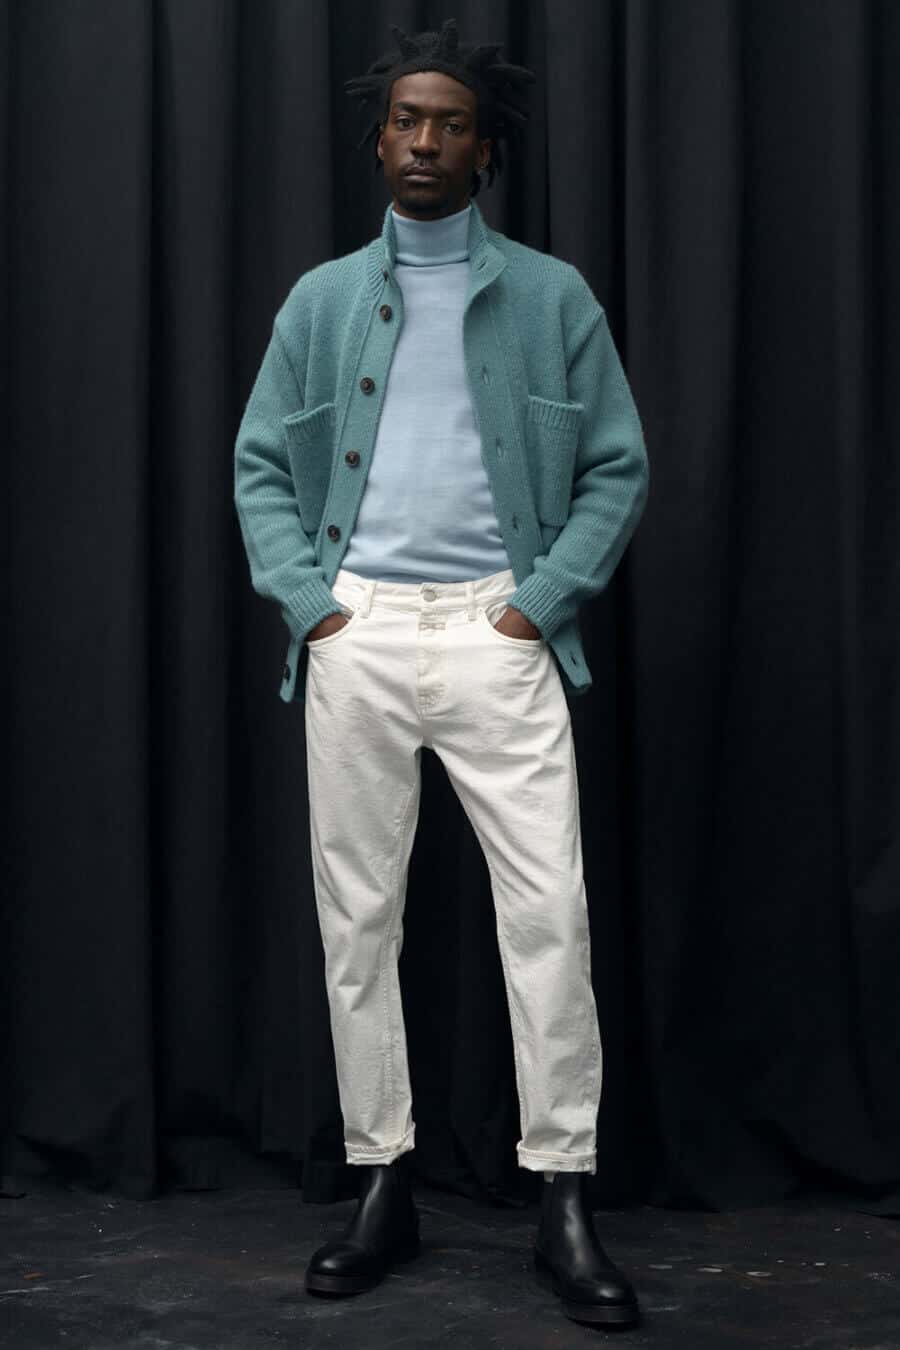 Men's tonal blue turtleneck and cardigan outfit with white jeans and boots